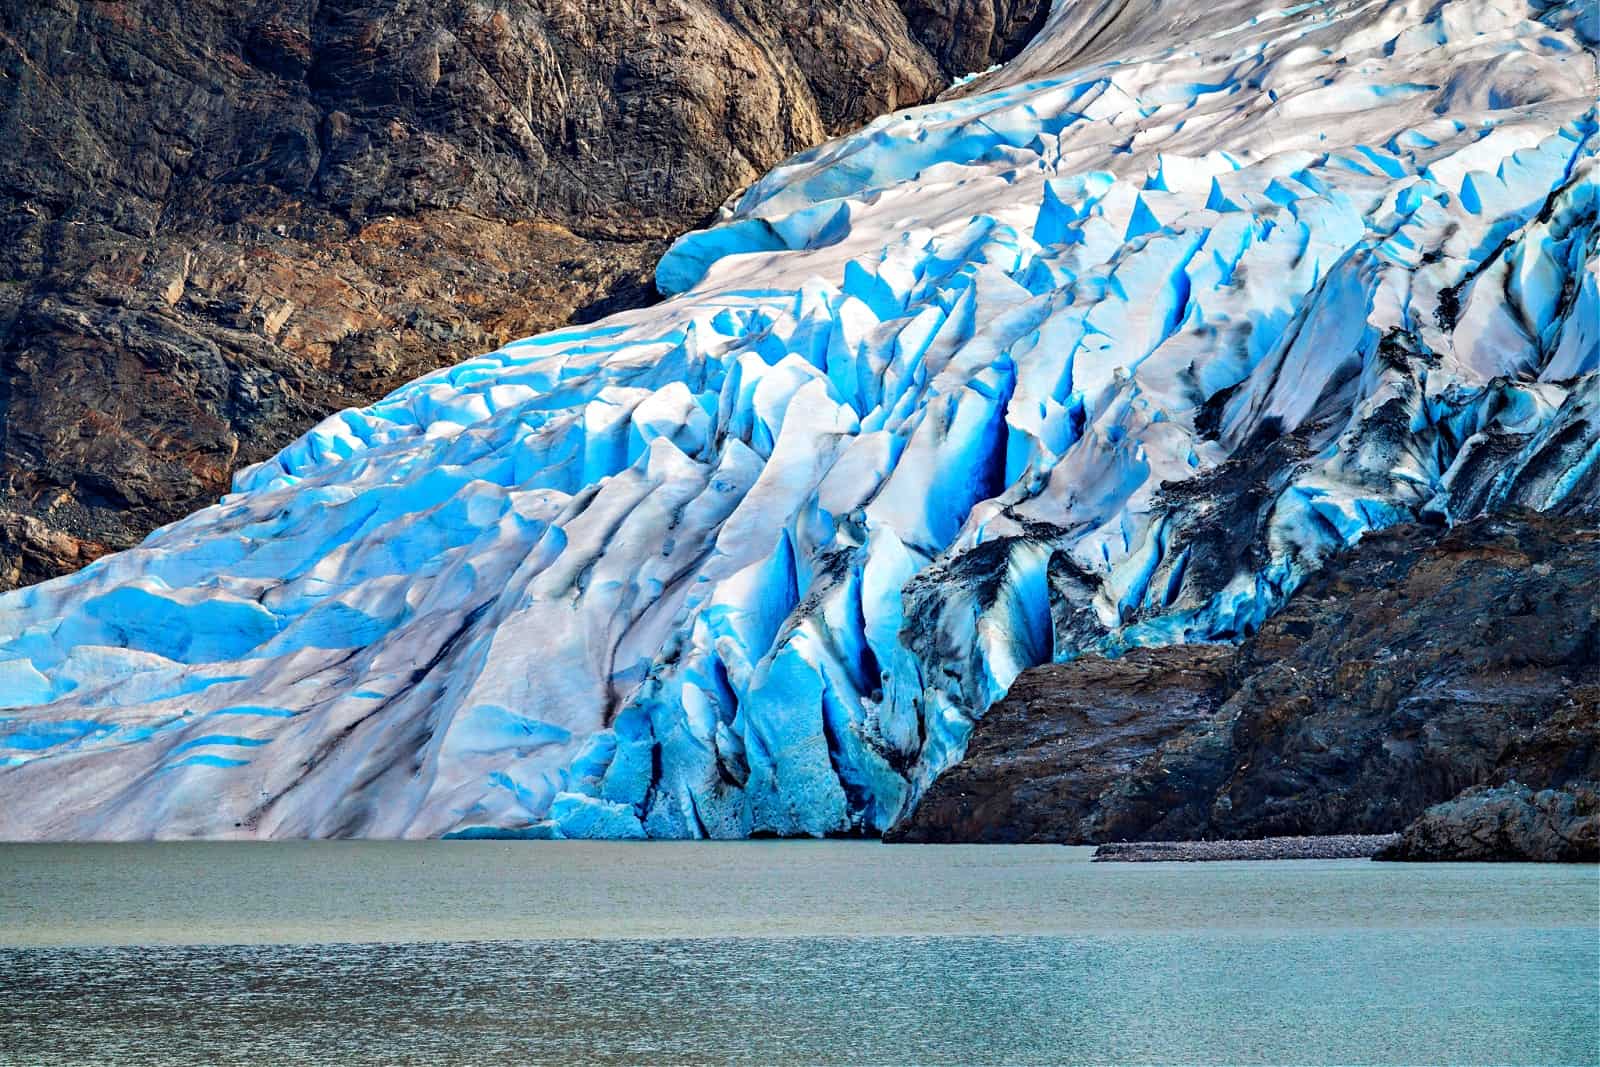 Close up of crevasses on the Mendenhall Glacier as it enters lake close to Juneau in Alaska